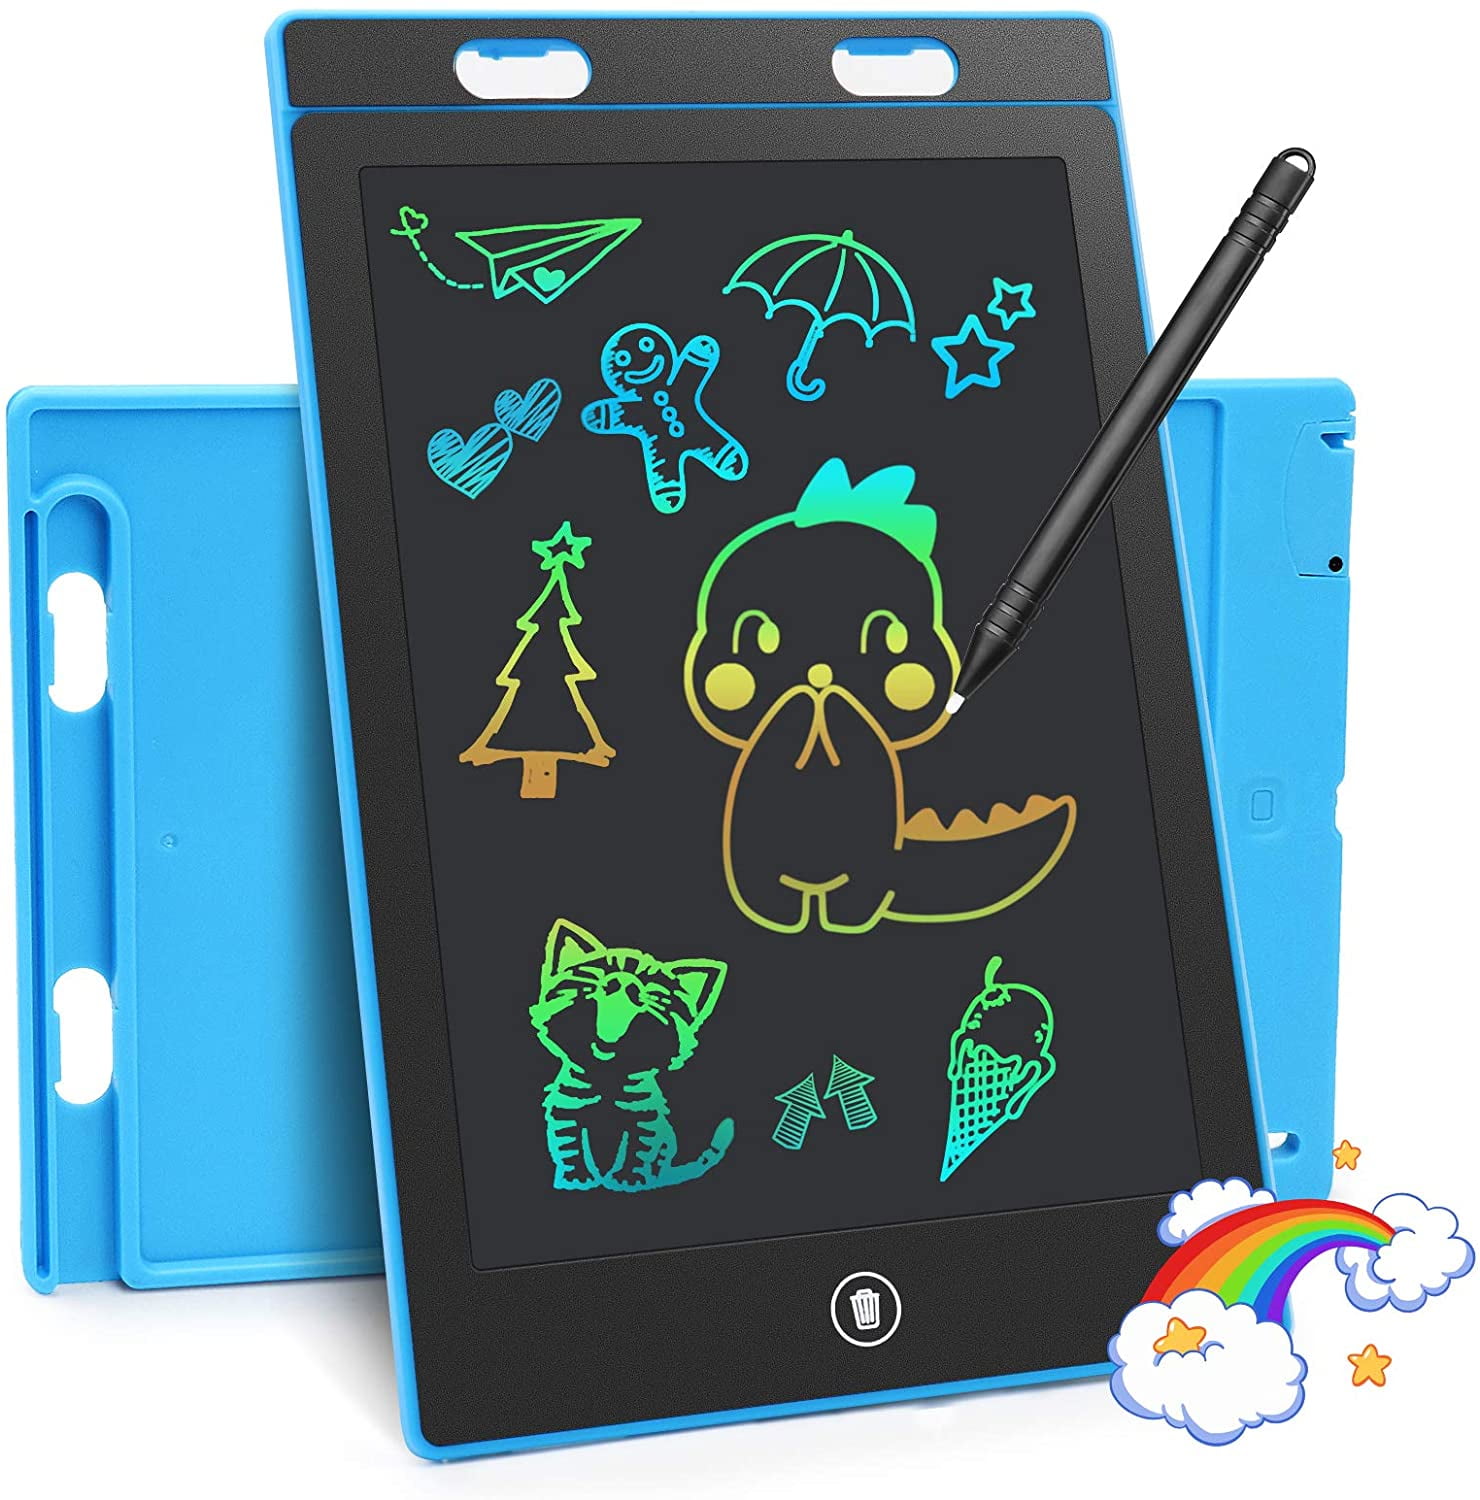 Educational and Learning Toys for Kids Toddler CUTE STONE 2-in-1 LCD Writing Tablet Doodle Board 11 Inch Colorful Drawing Tablet with Magnet Stickers Erasable Reusable Electronic Drawing Pads 